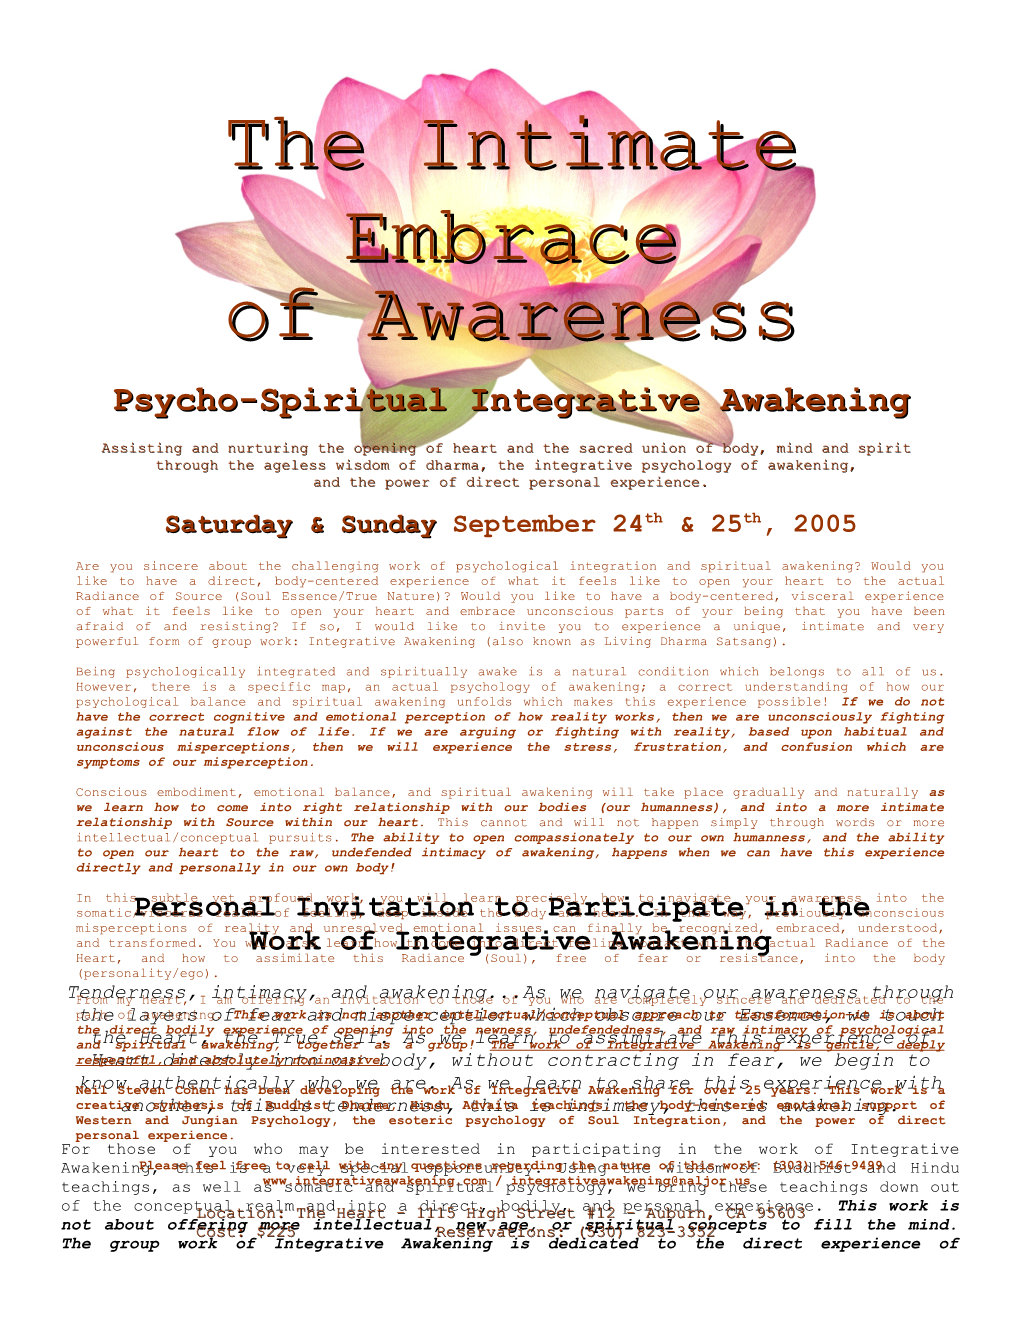 Personal Invitation to Participate in the Work of Integrative Awakening